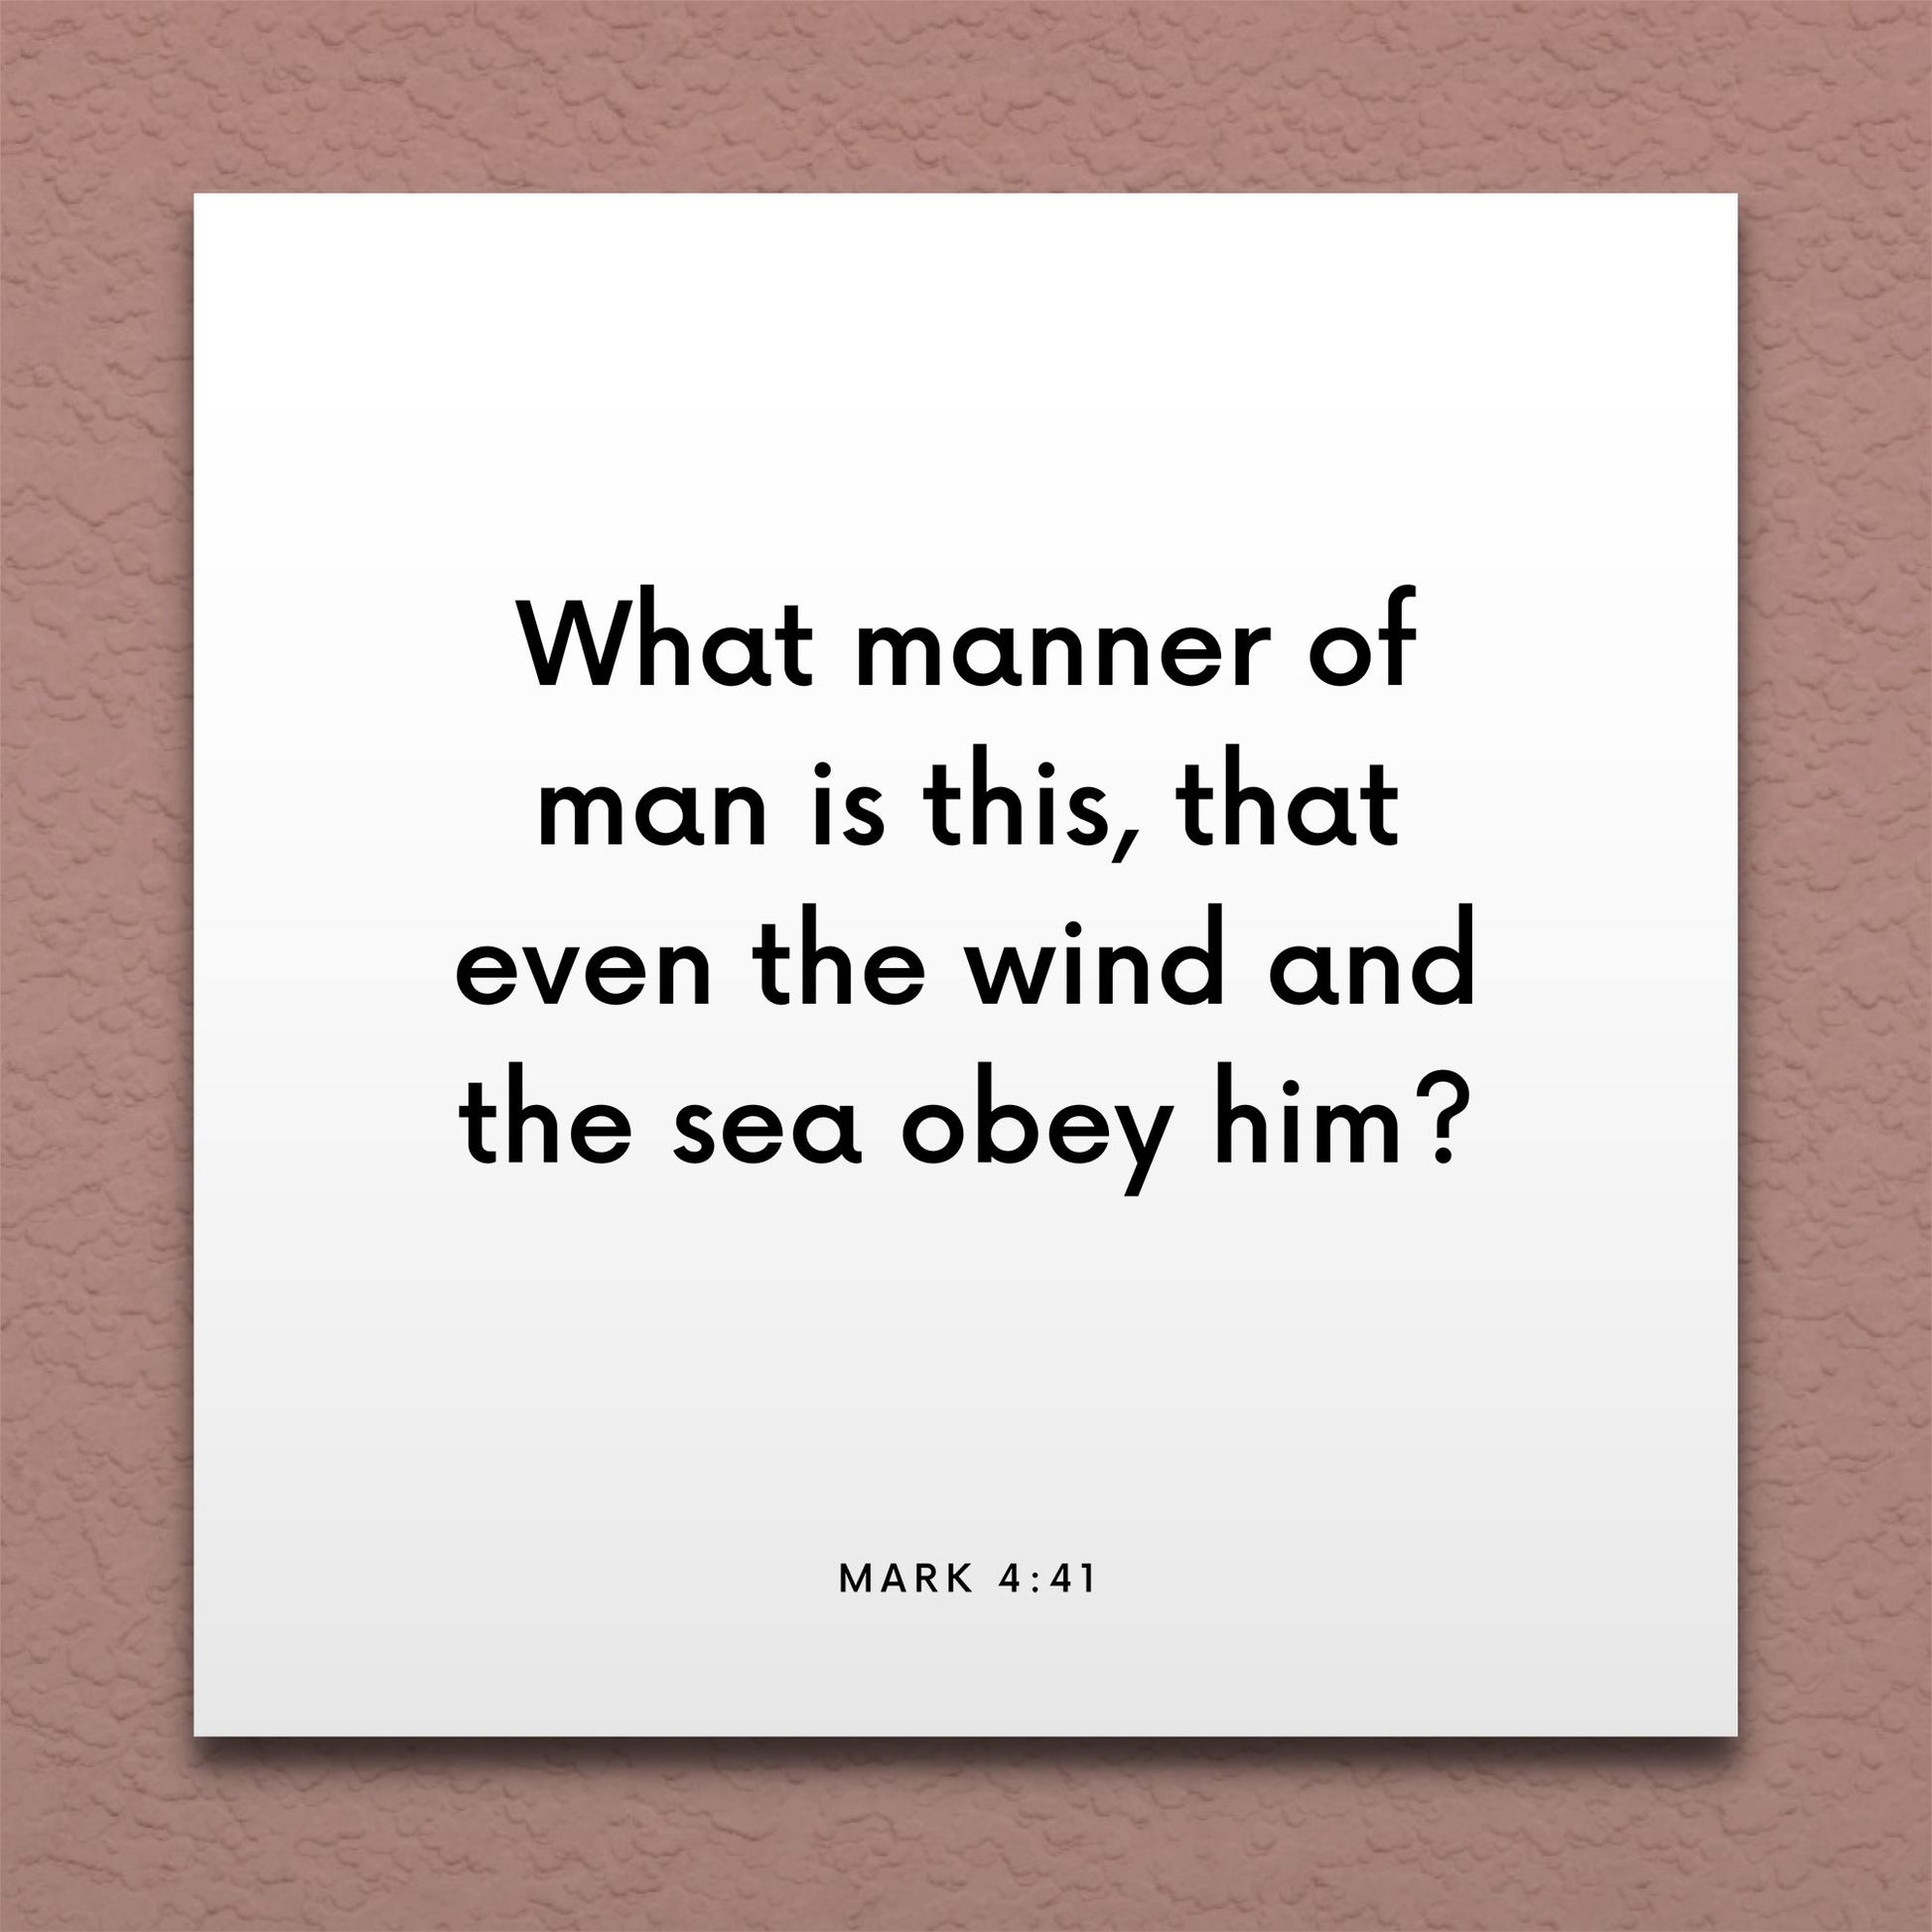 Wall-mounted scripture tile for Mark 4:41 - "What manner of man is this?"